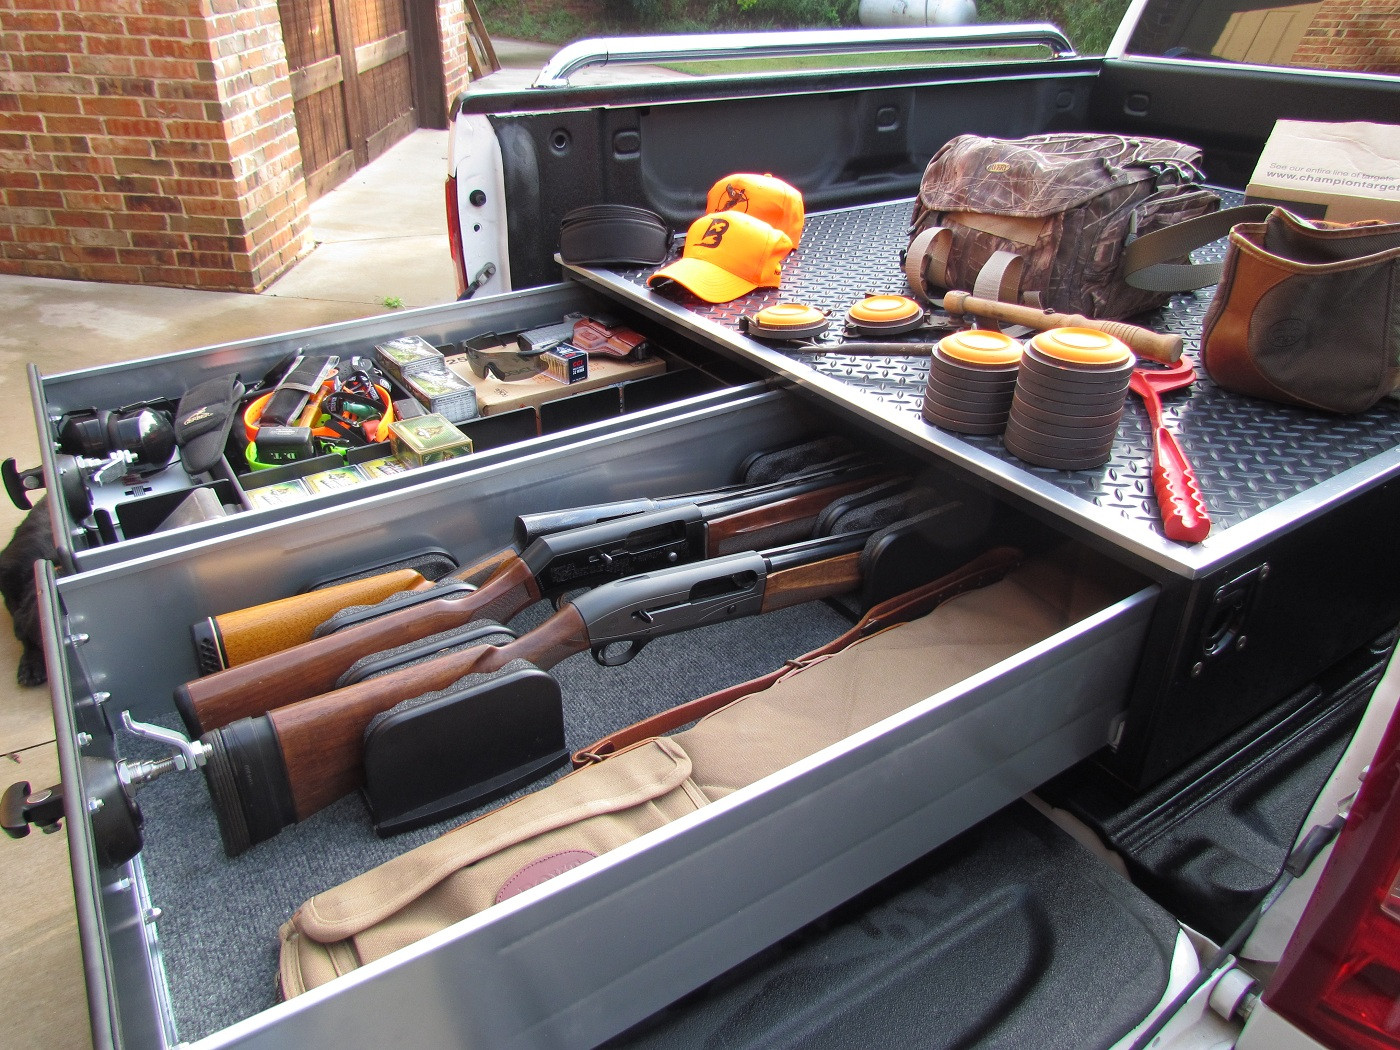 DIY Truck Bed Organizer
 MobileStrong Truck Bed Storage Drawers